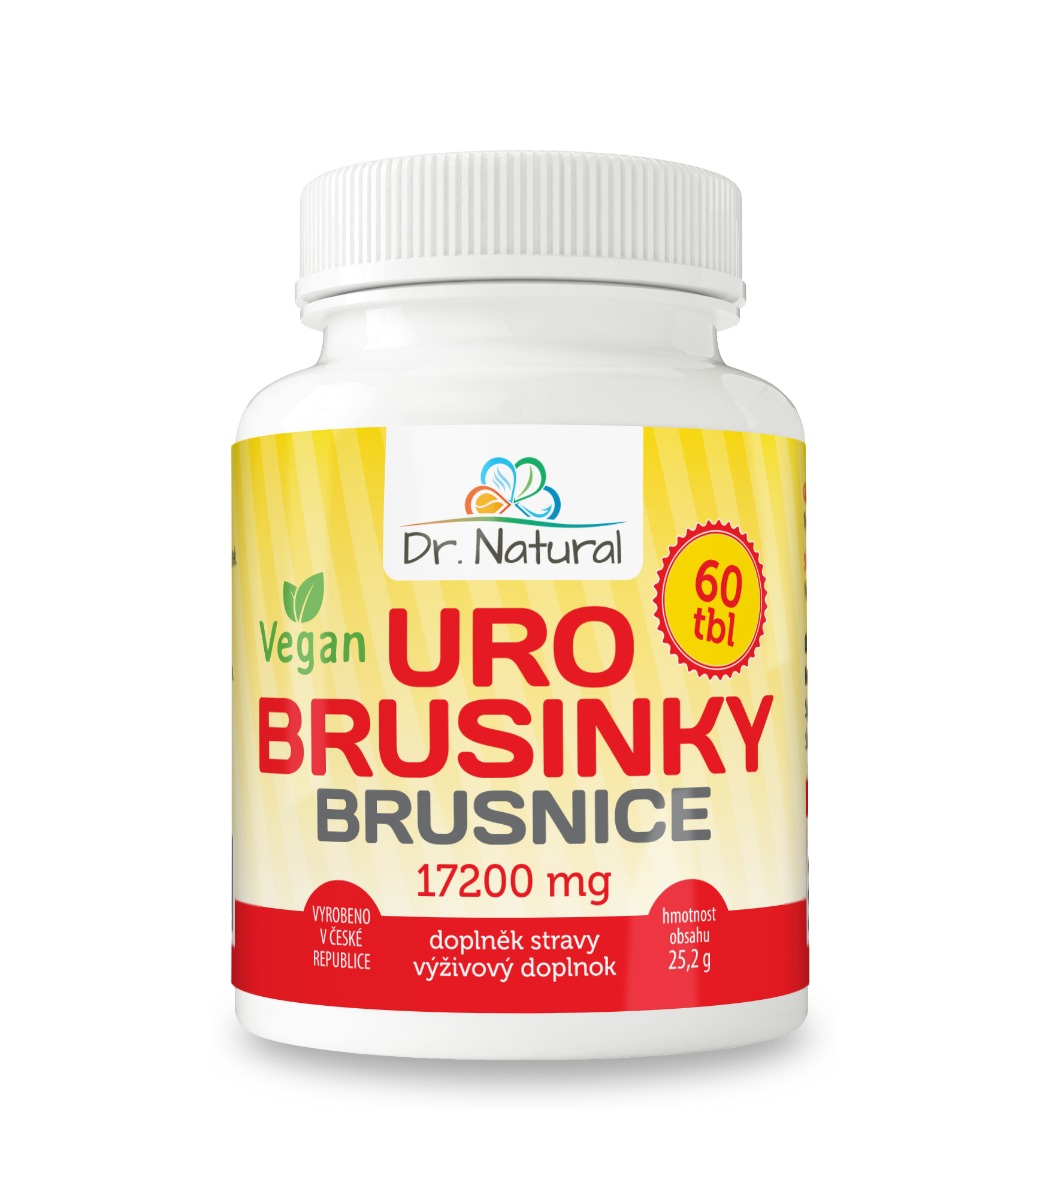 Dr. Natural URO Brusinky 17 200 mg 60 tablet Dr. Natural